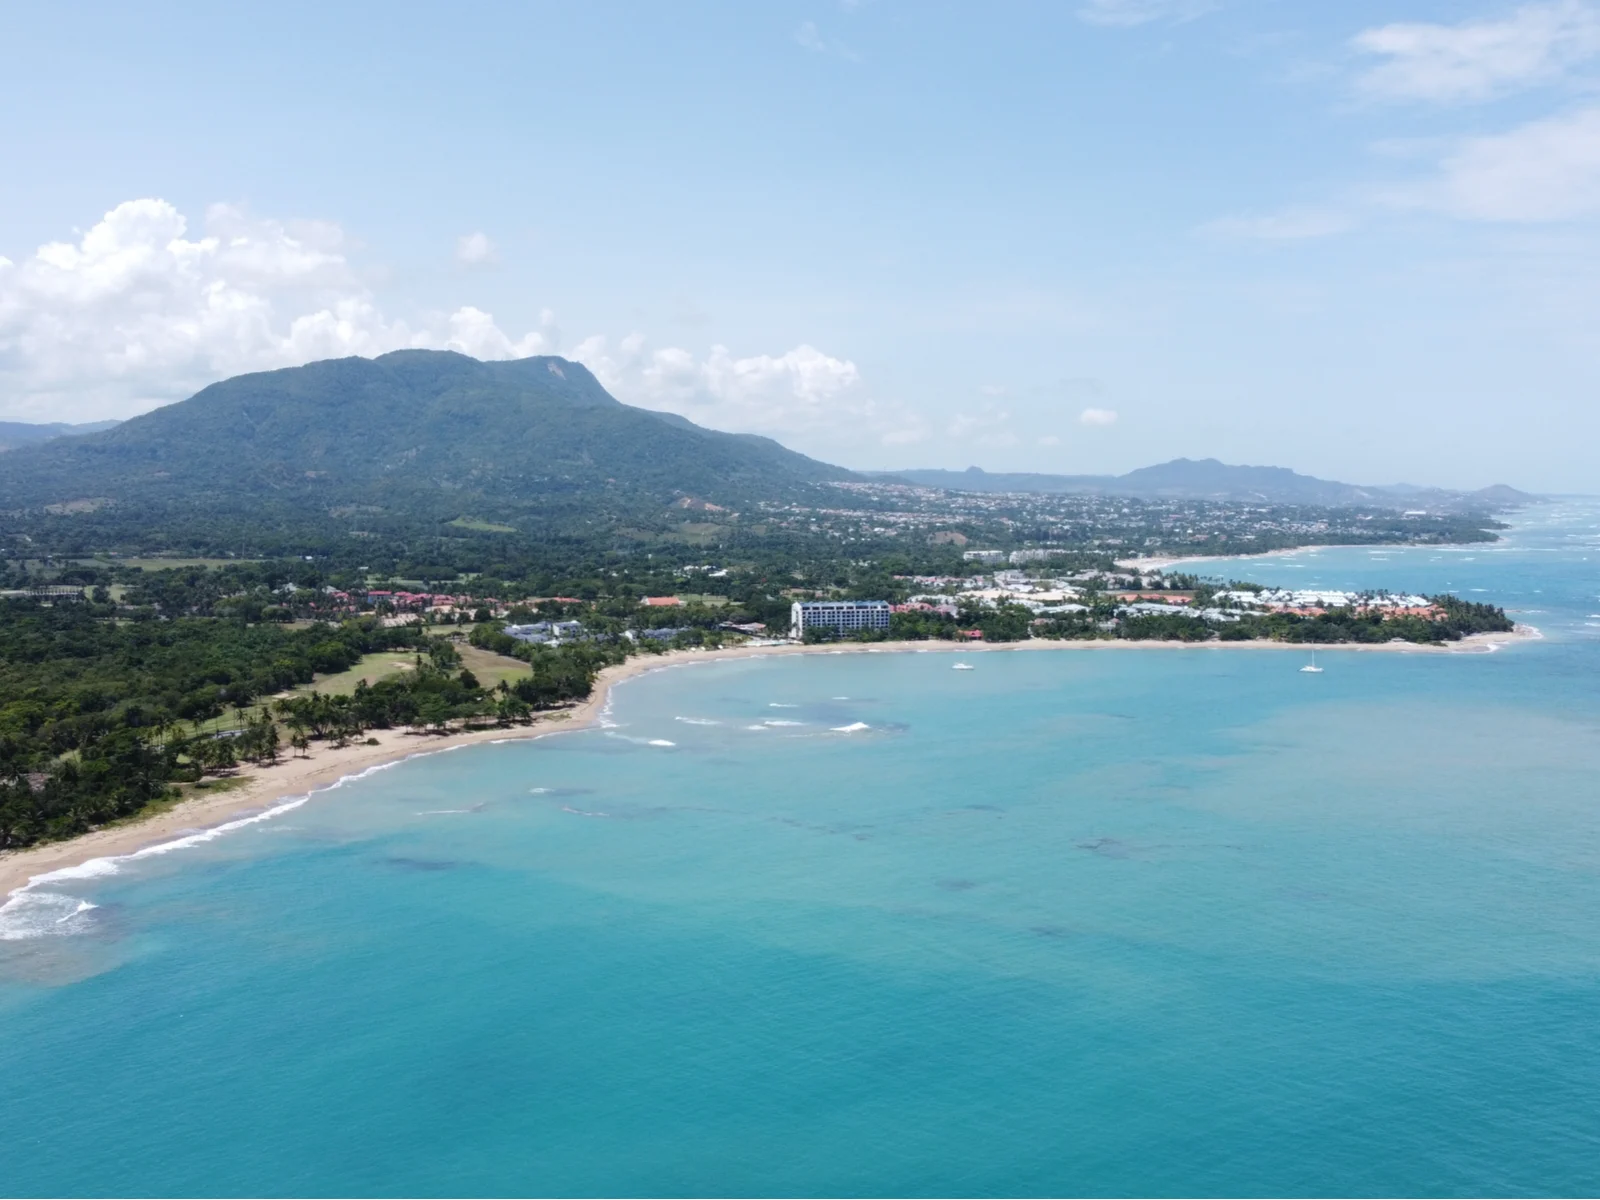 Aerial view of the winding shoreline and calm clear water of Playa Dorada in Puerto Plata, one of the best beaches in the Dominican Republic with a massive mountain and a populated region 